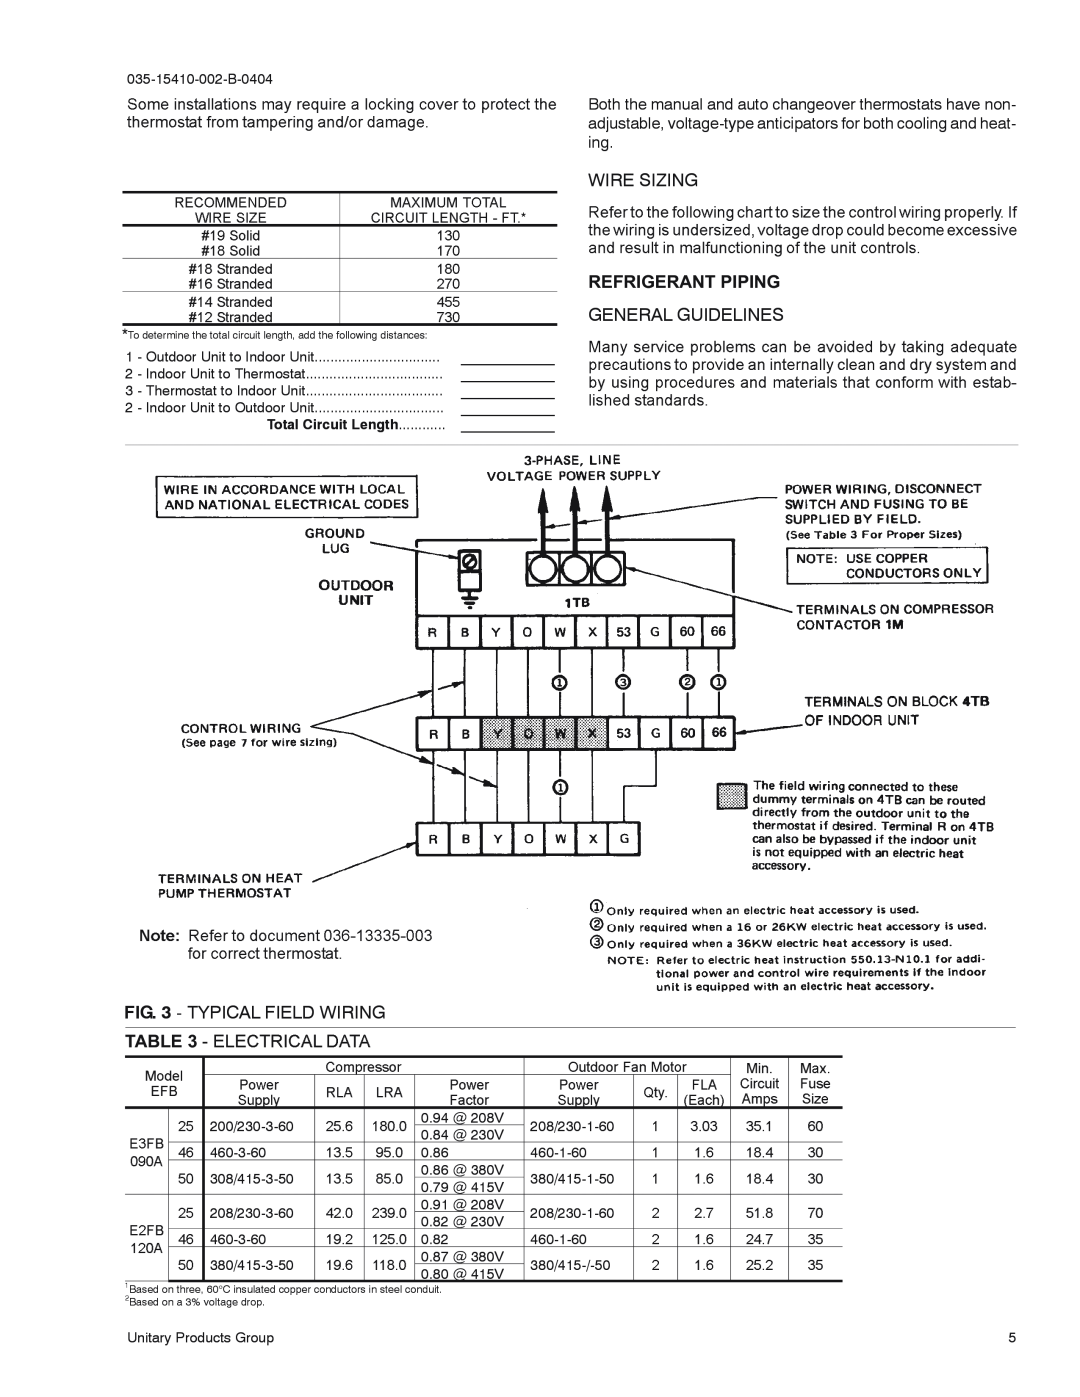 York E3FB090, E2FB120 installation manual Wire Sizing, Refrigerant Piping, General Guidelines, Typical Field Wiring 